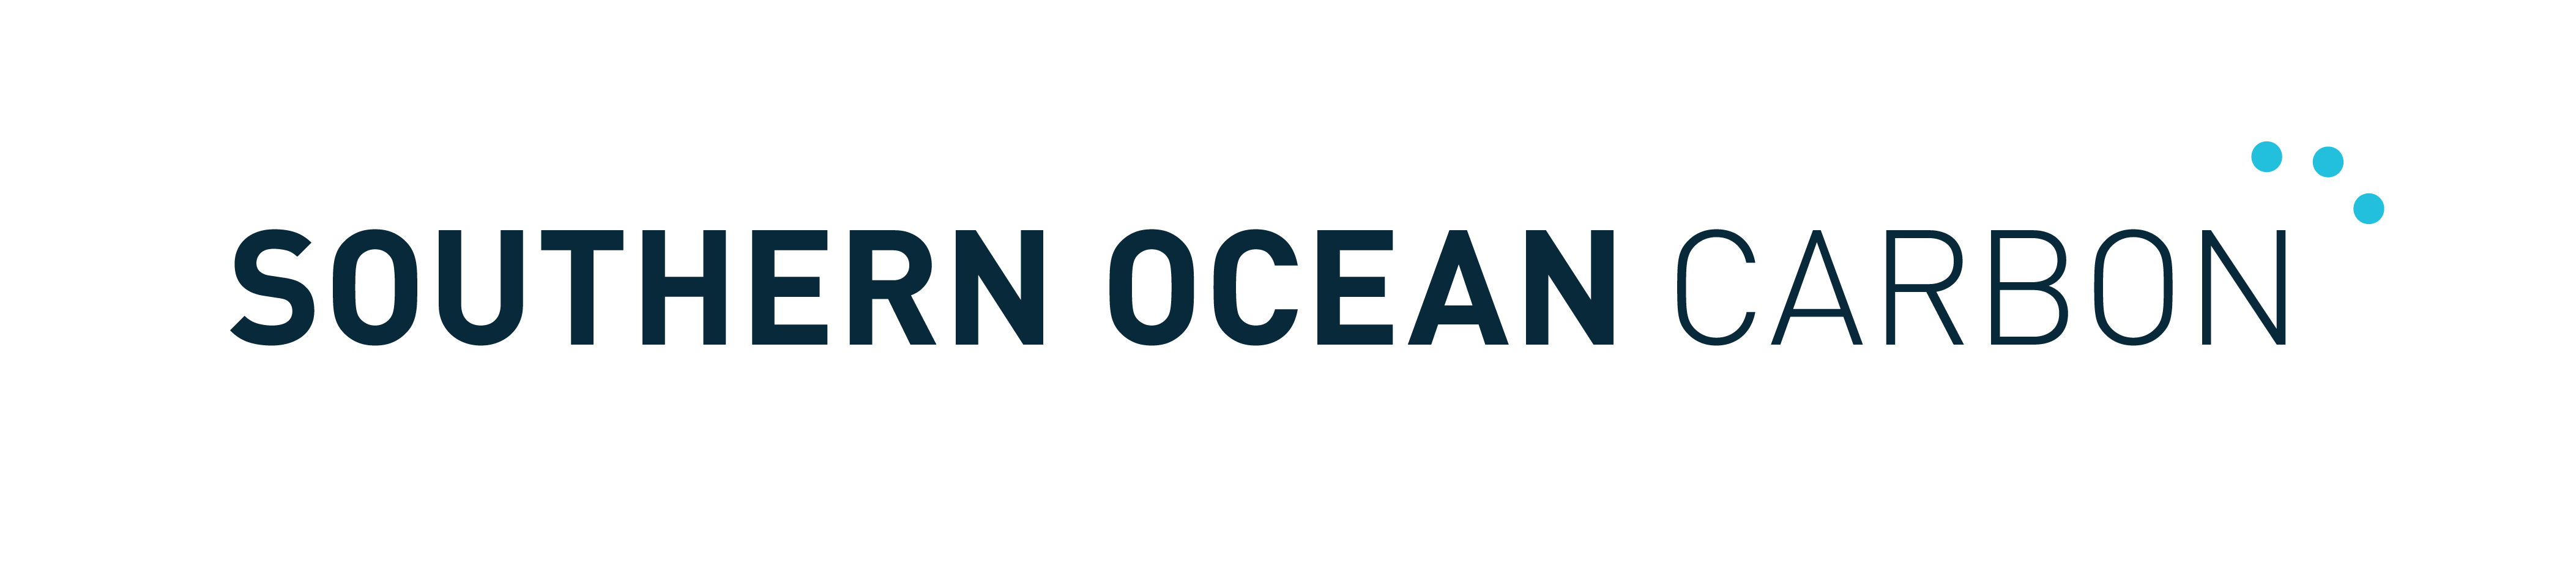 Southern ocean carbon